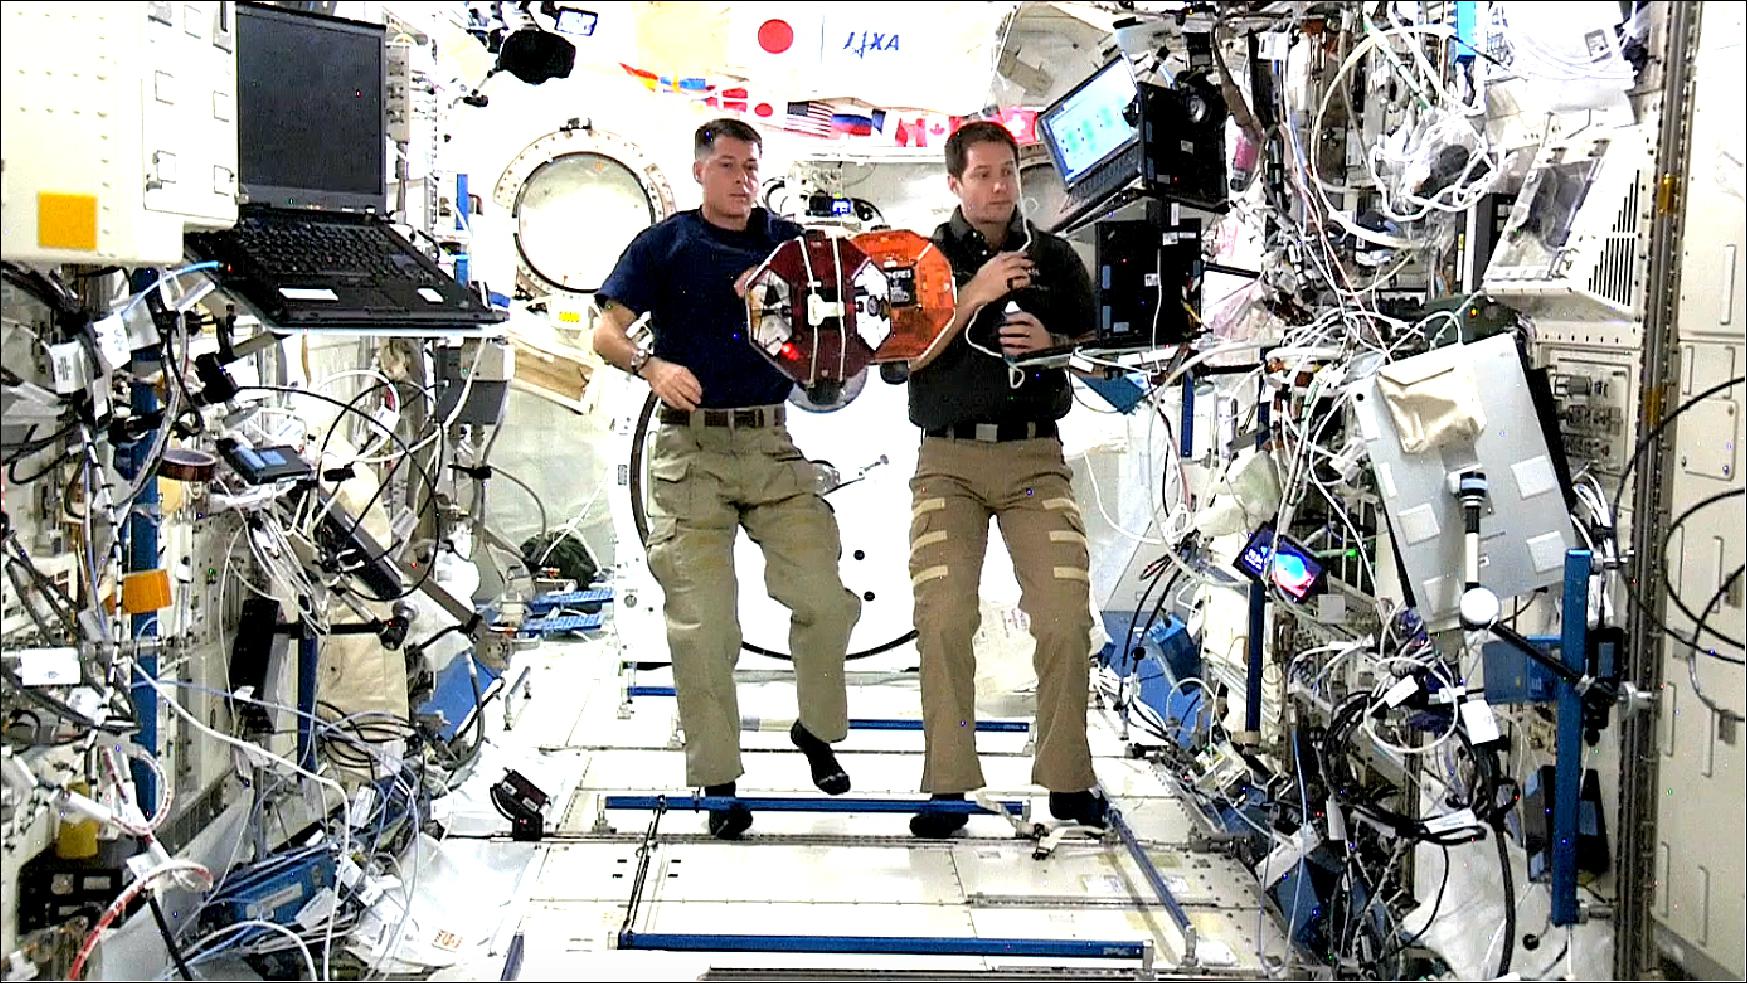 Figure 26: Commander Shane Kimbrough and ESA Astronaut Thomas Pesquet running a test on SPHERES - Tether Demonstration; Expedition 50 (image credit: NASA Ames)